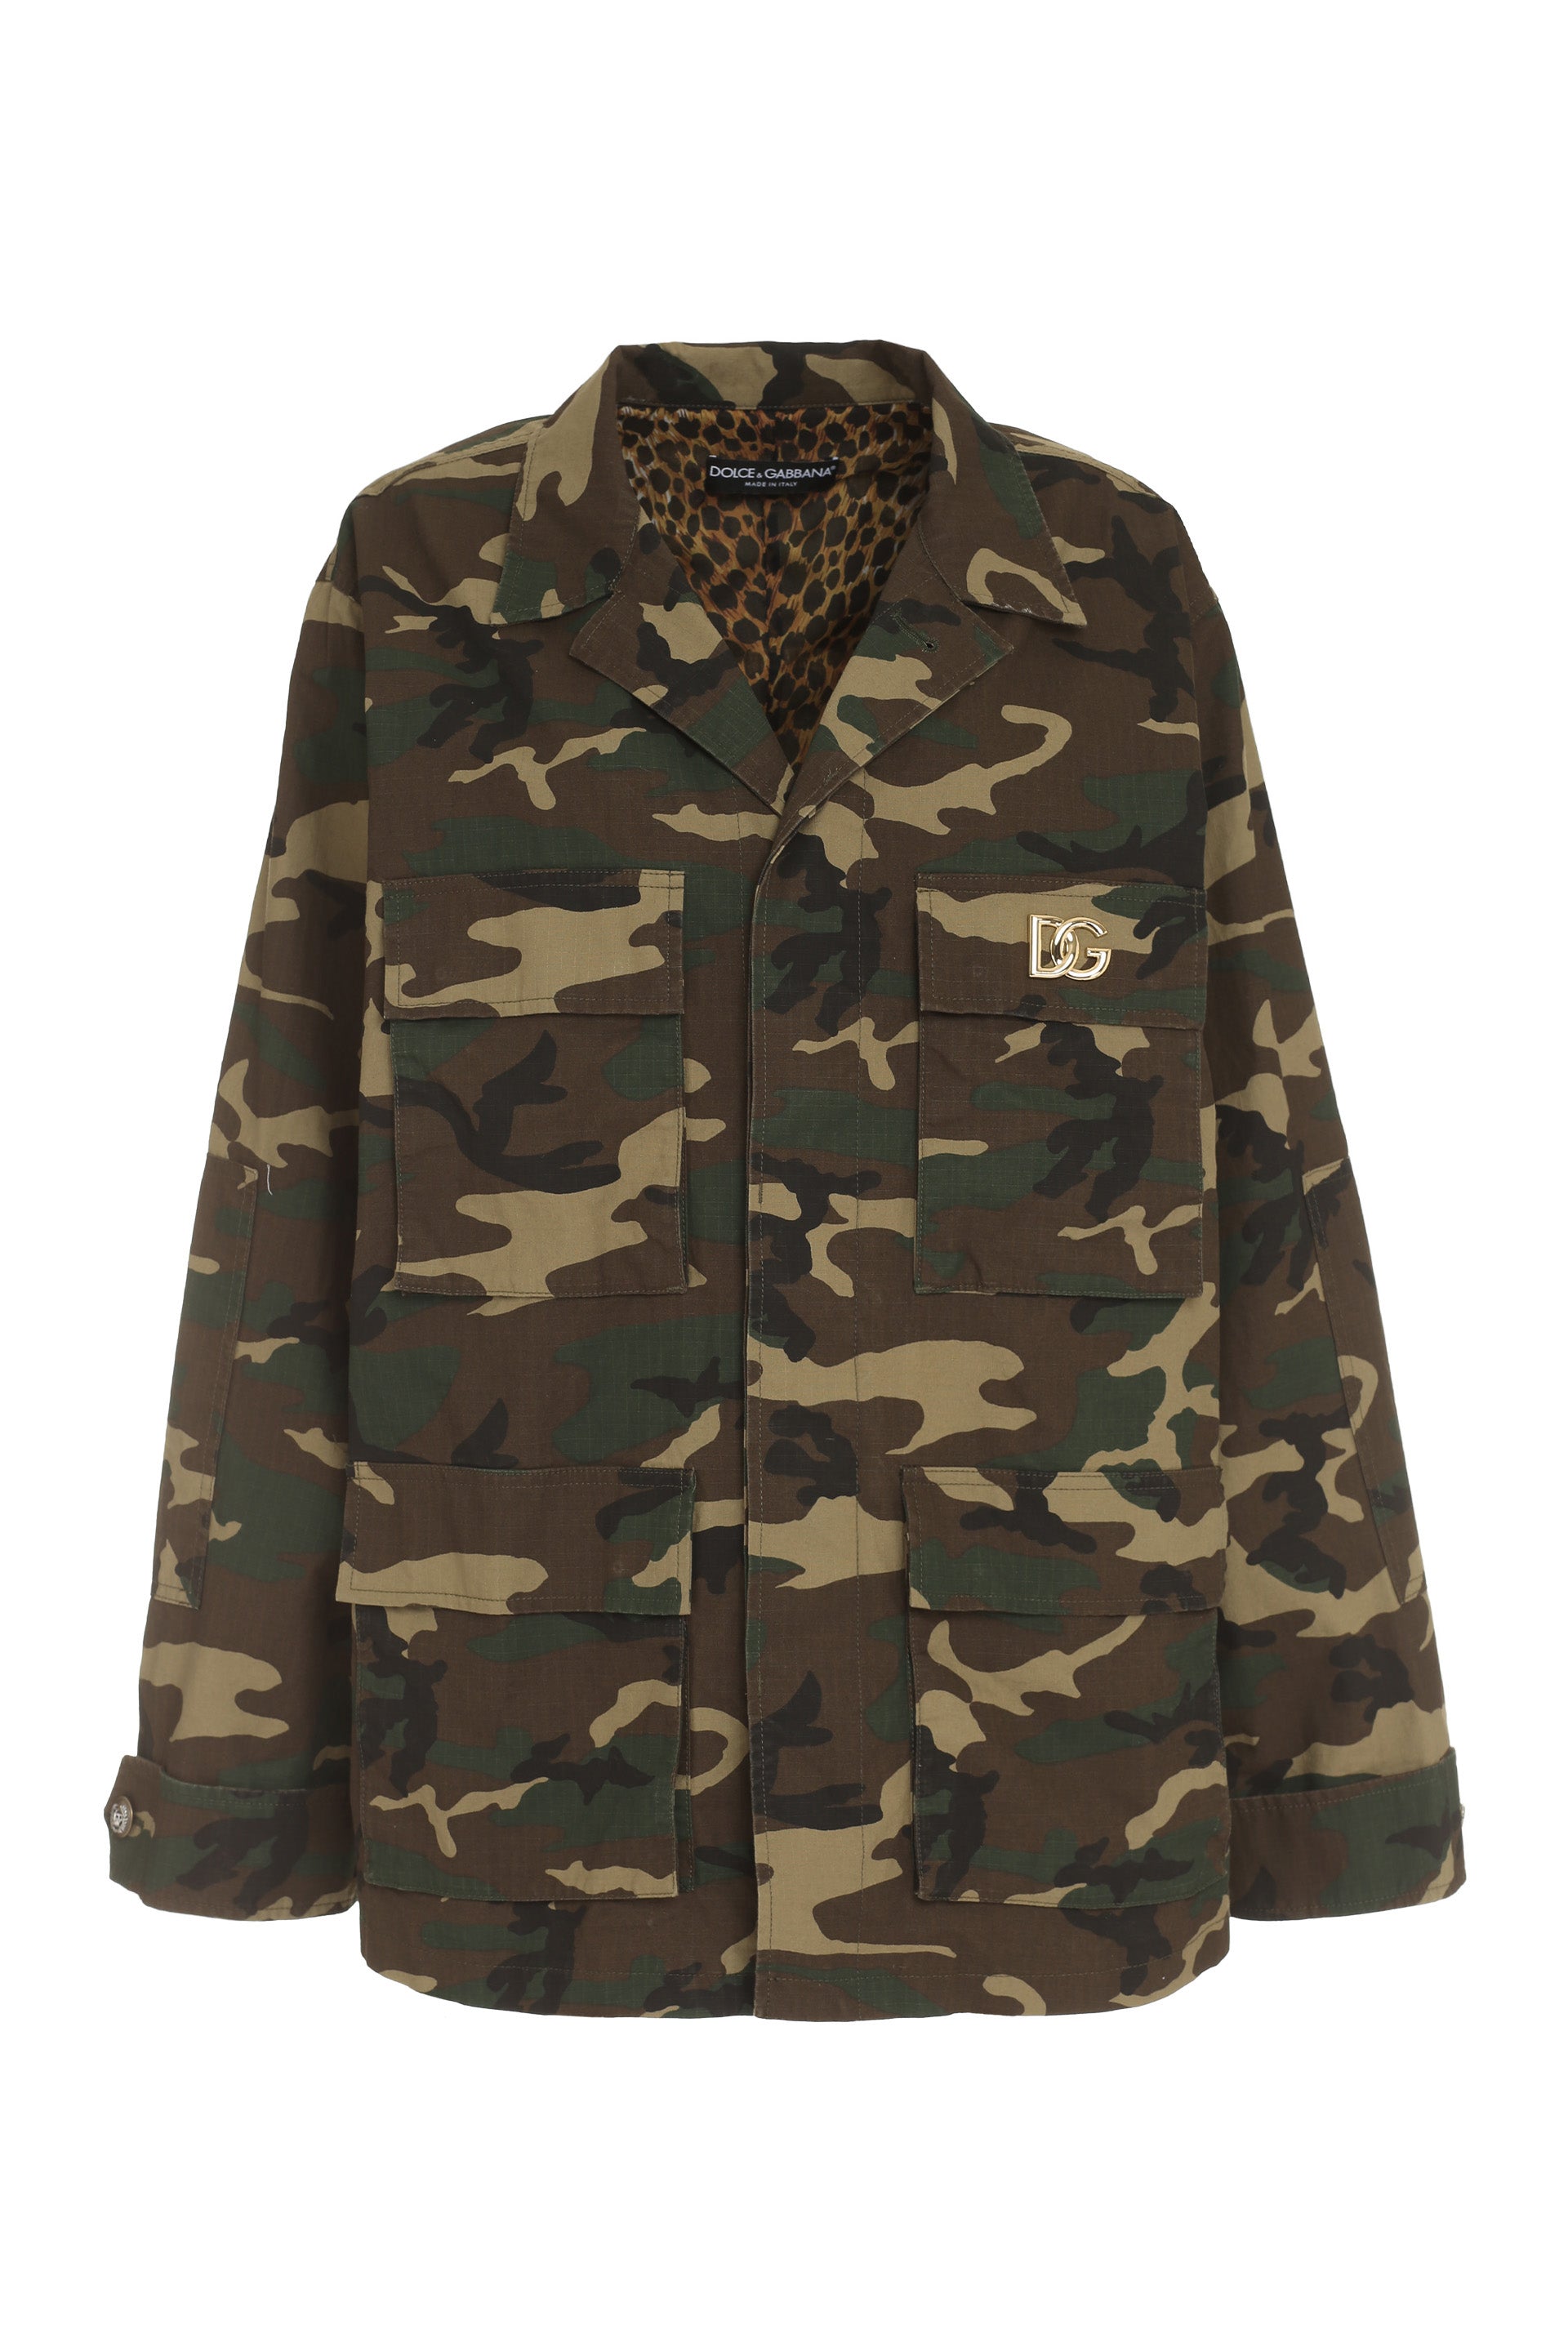 Dolce & Gabbana Multi-pocket Cotton Jacket With Camouflage Print And Leopard Print Lining In Multicolor